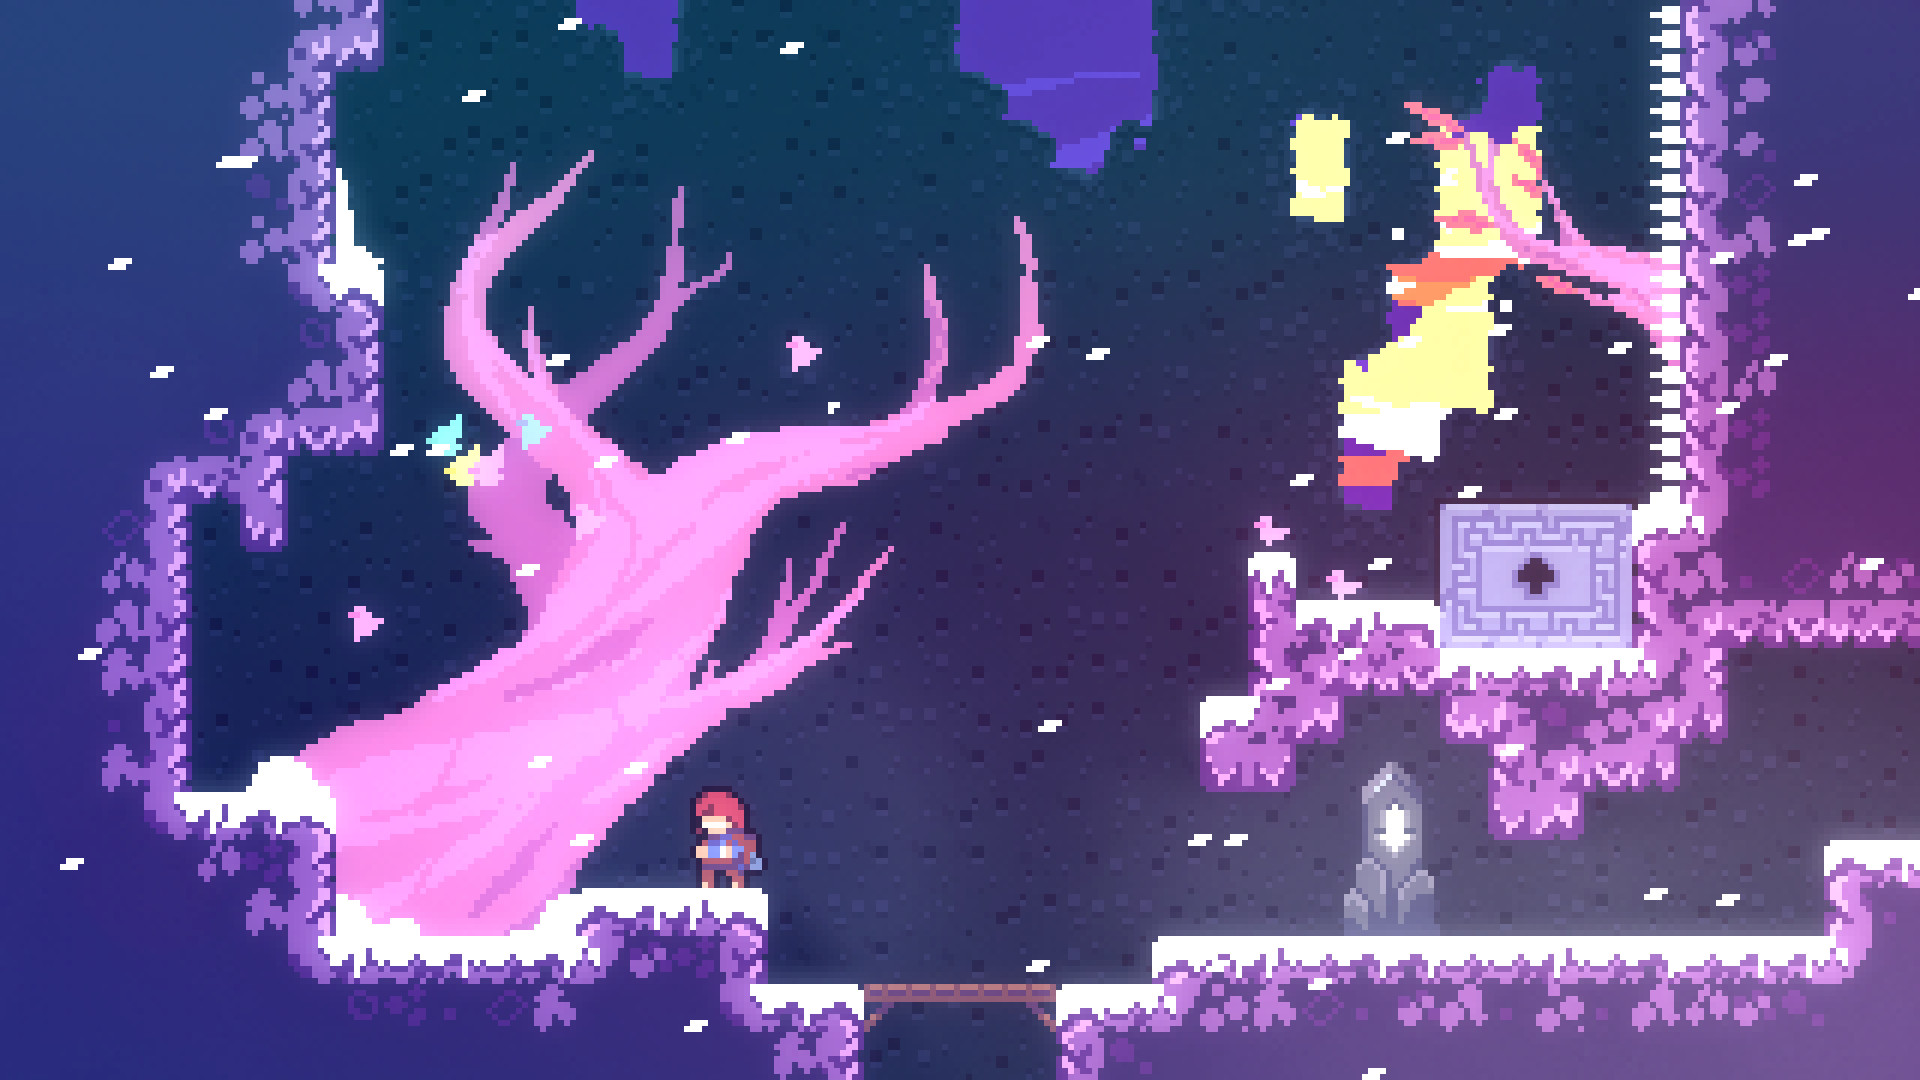 Towerfall Creators’ Next Game “Celeste” Launches in January 2018